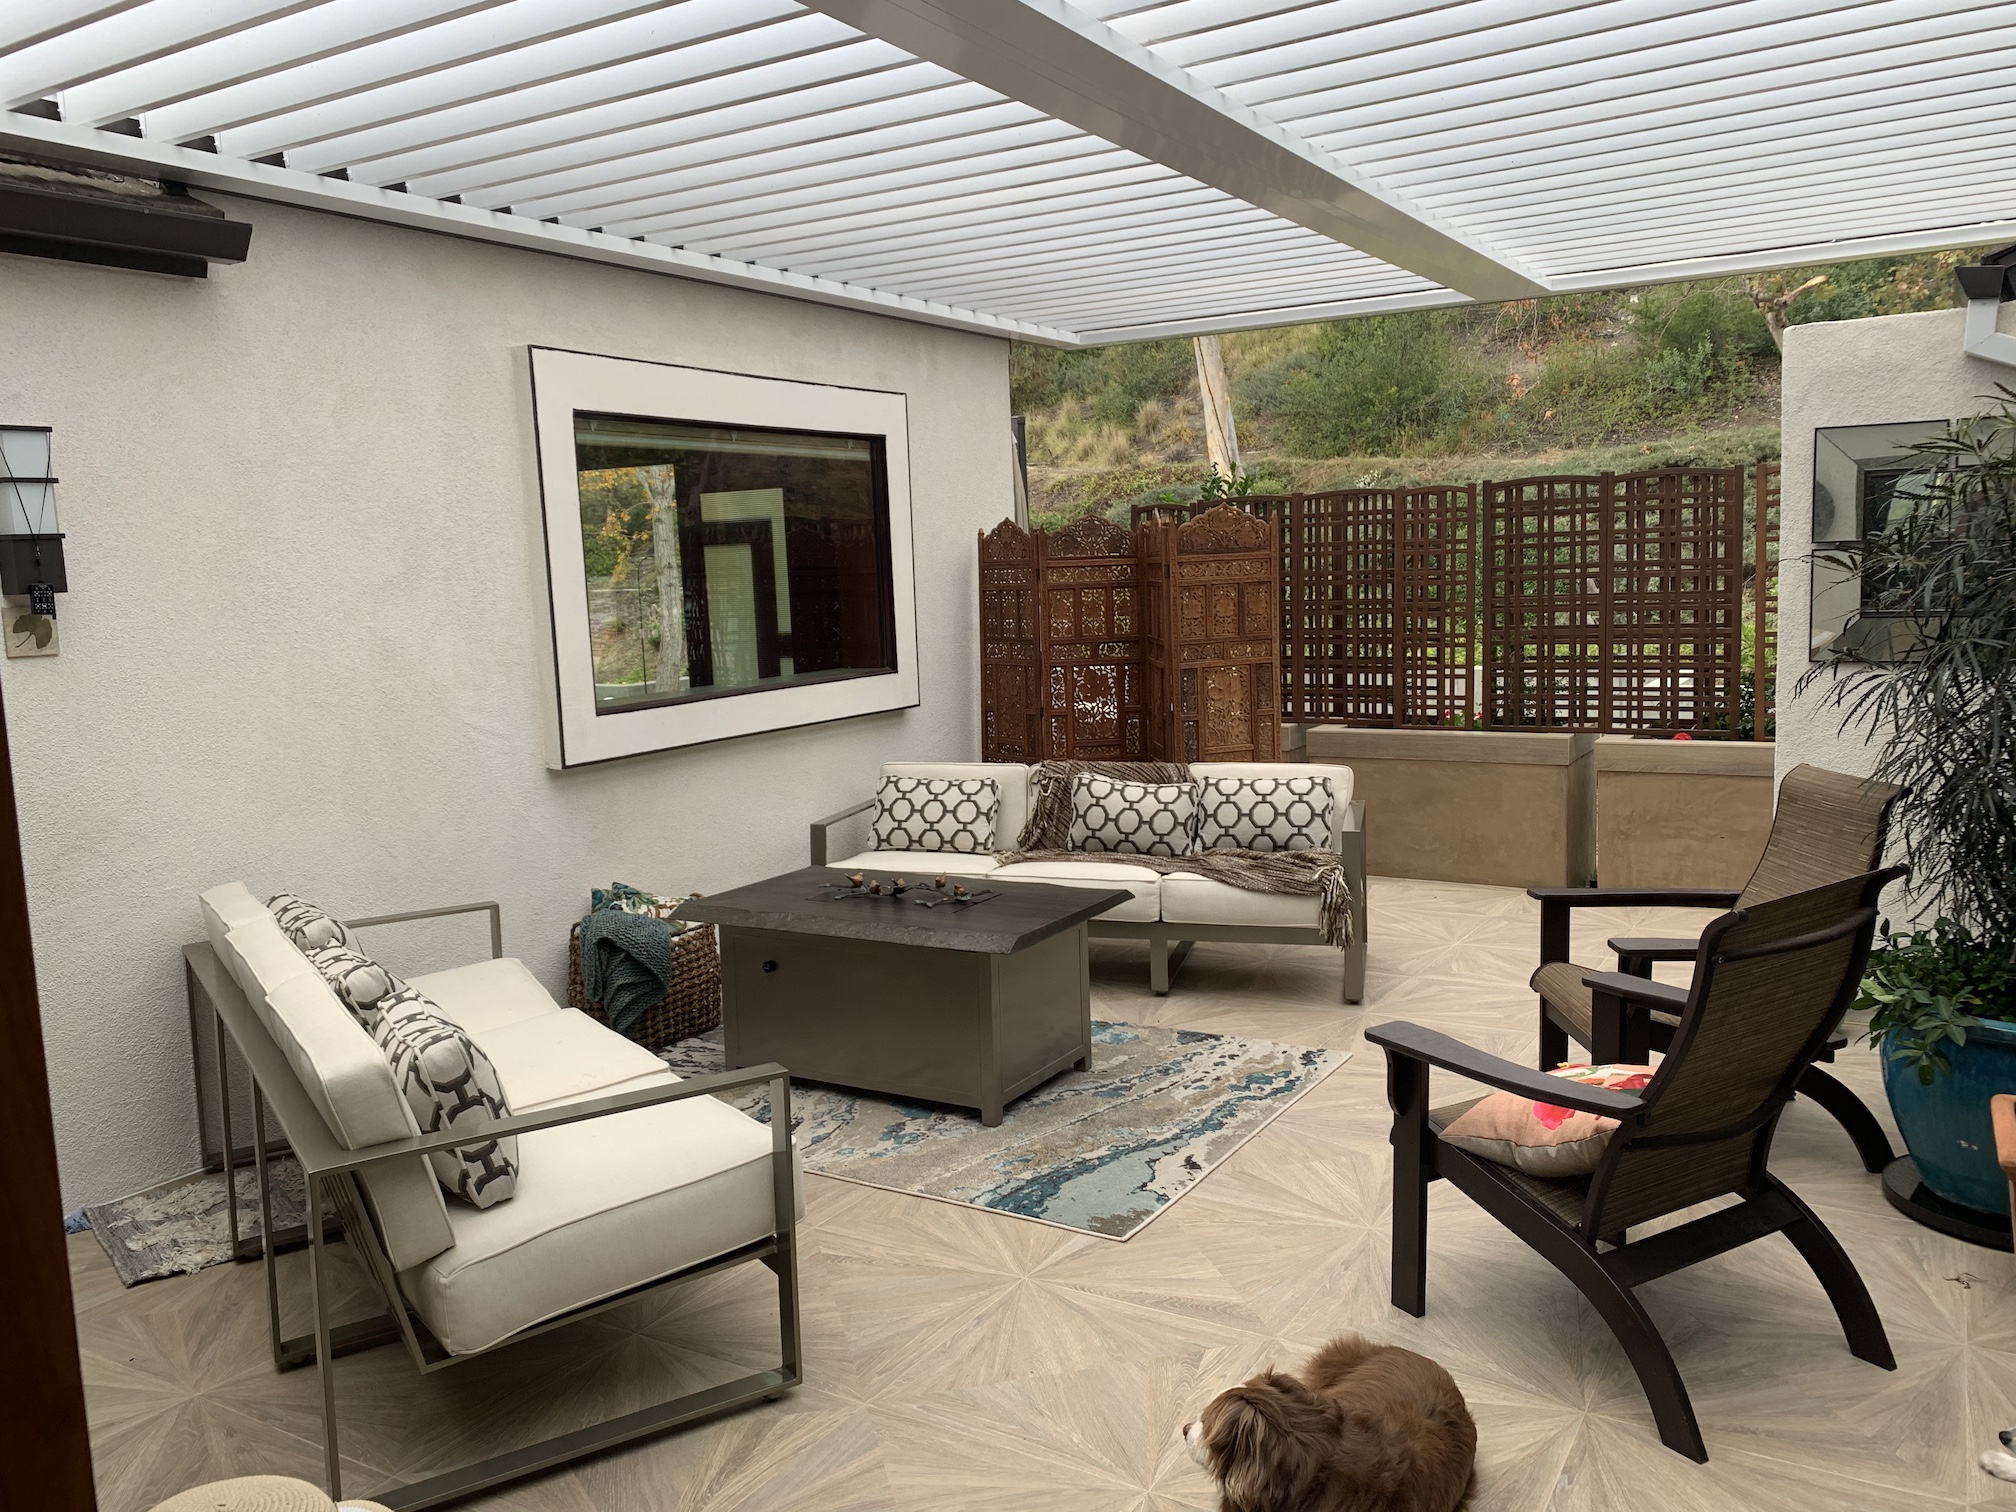 Factory Direct Patio Covers Inc.- Patio Cover Designs